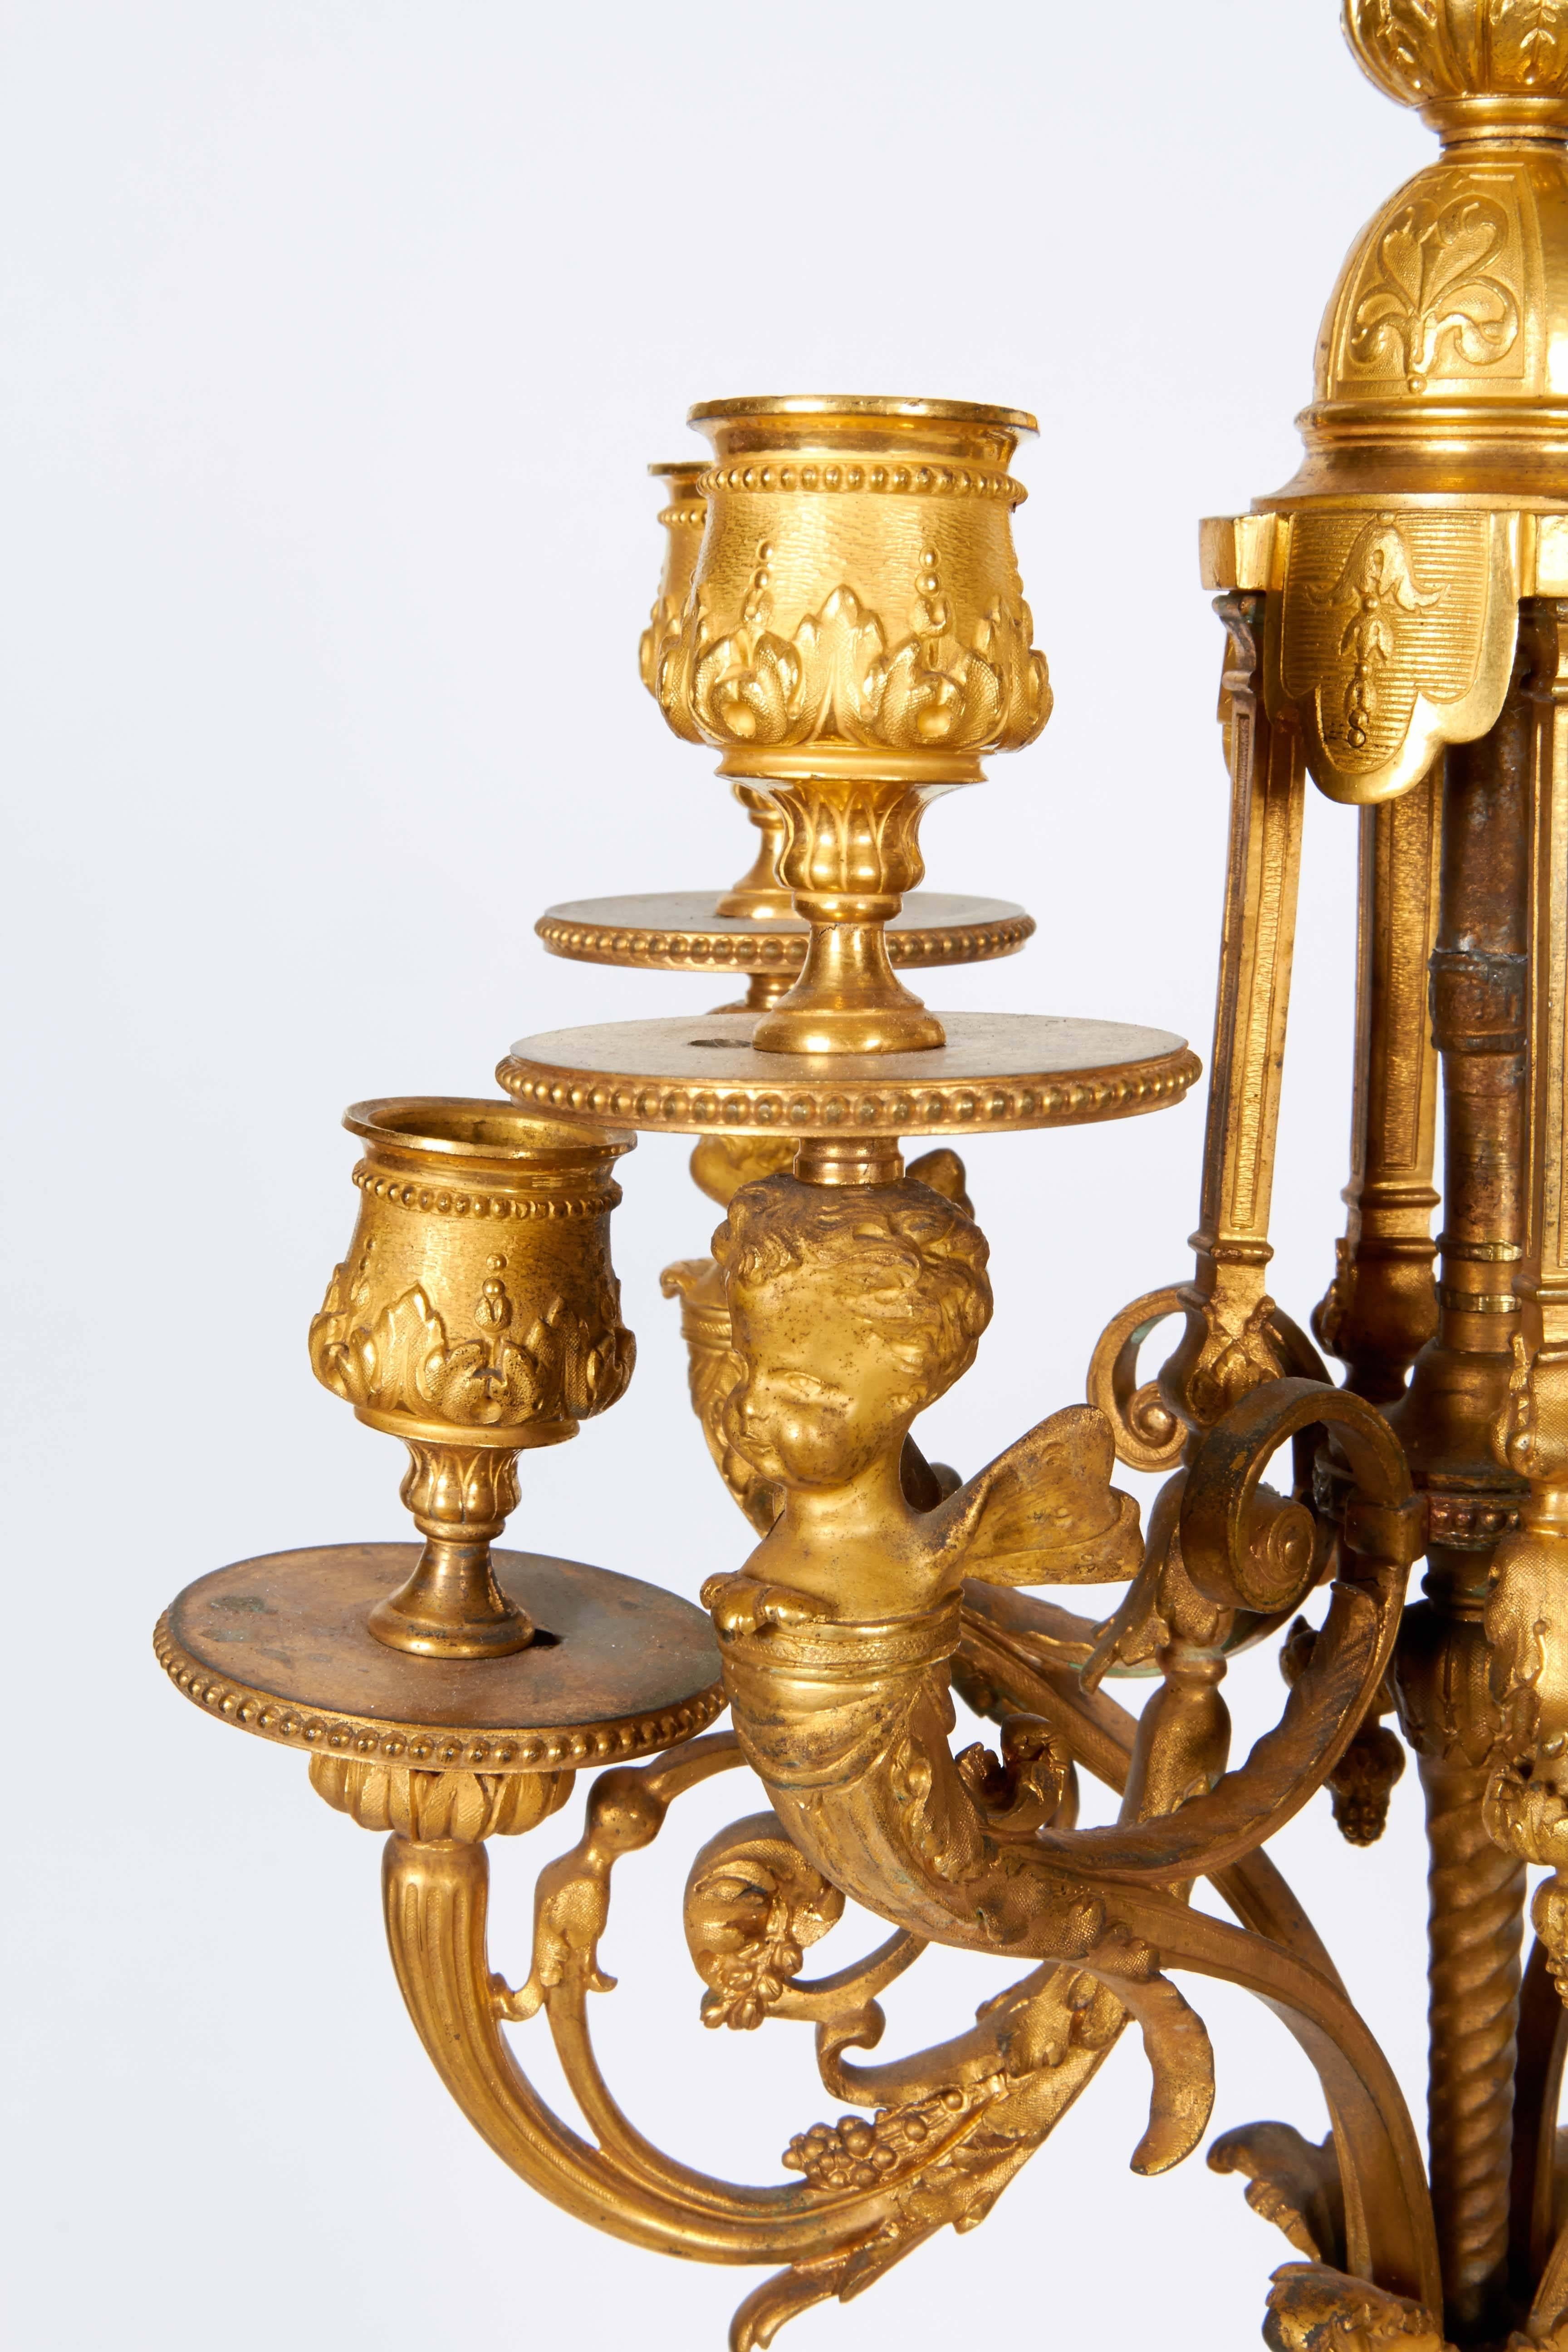 Pair of French ormolu gilt bronze candelabra with winged cherubs.

Signed MM on some bronzes.

.